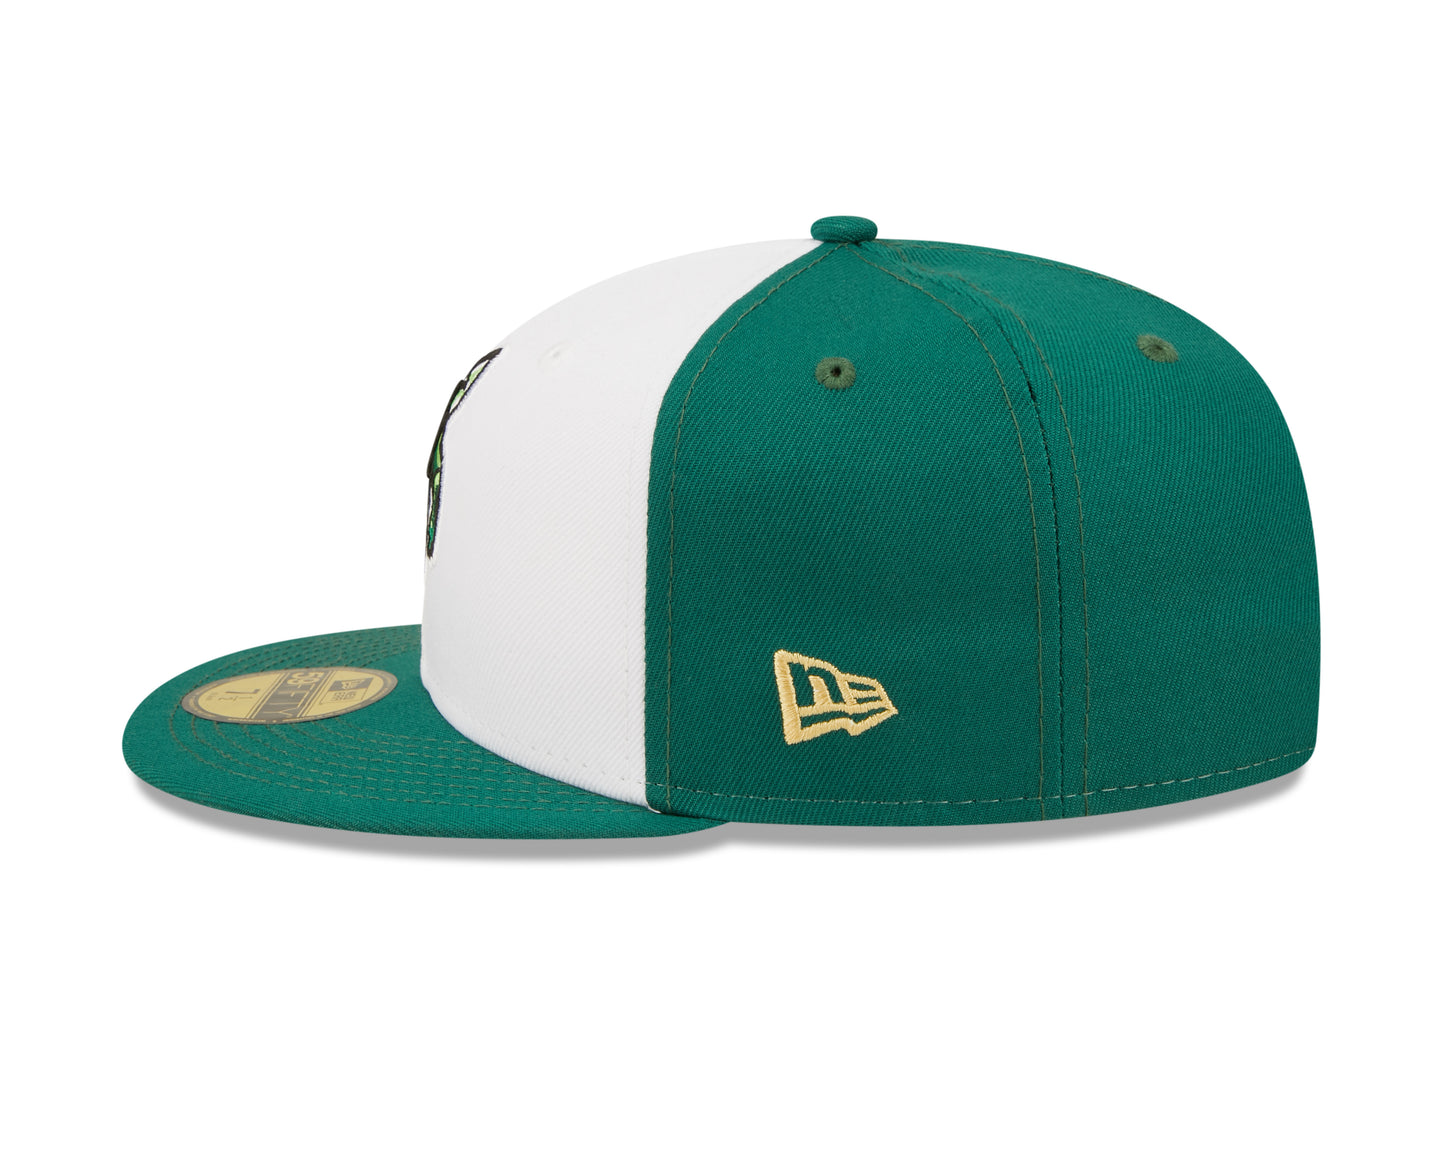 New Era - 59fifty Fitted - MiLB - AC Perf - Augusta Green Jackets - White/Green - Headz Up 